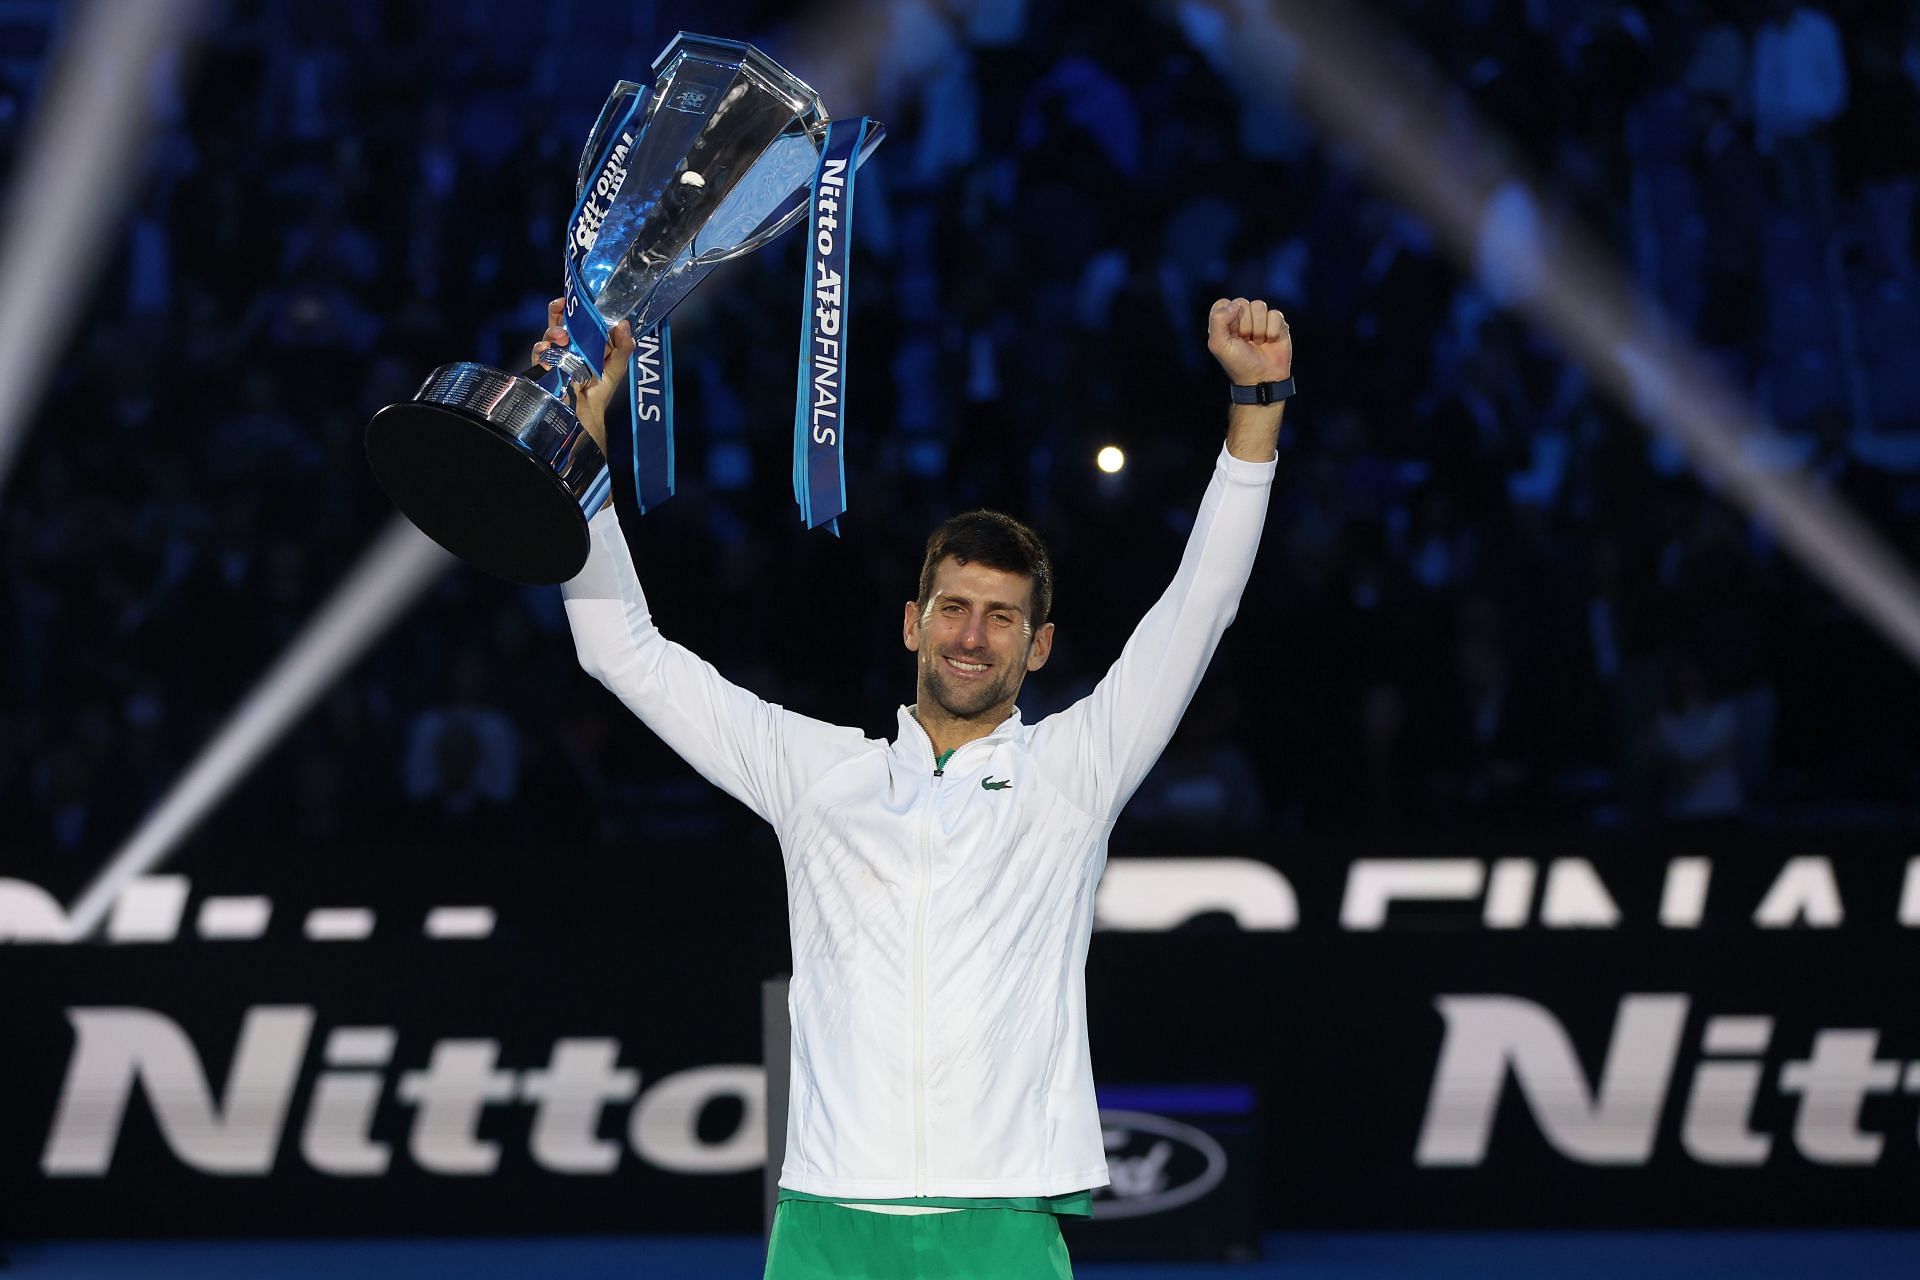 Novak Djokovic earns praise from leading TV personality and writer for his